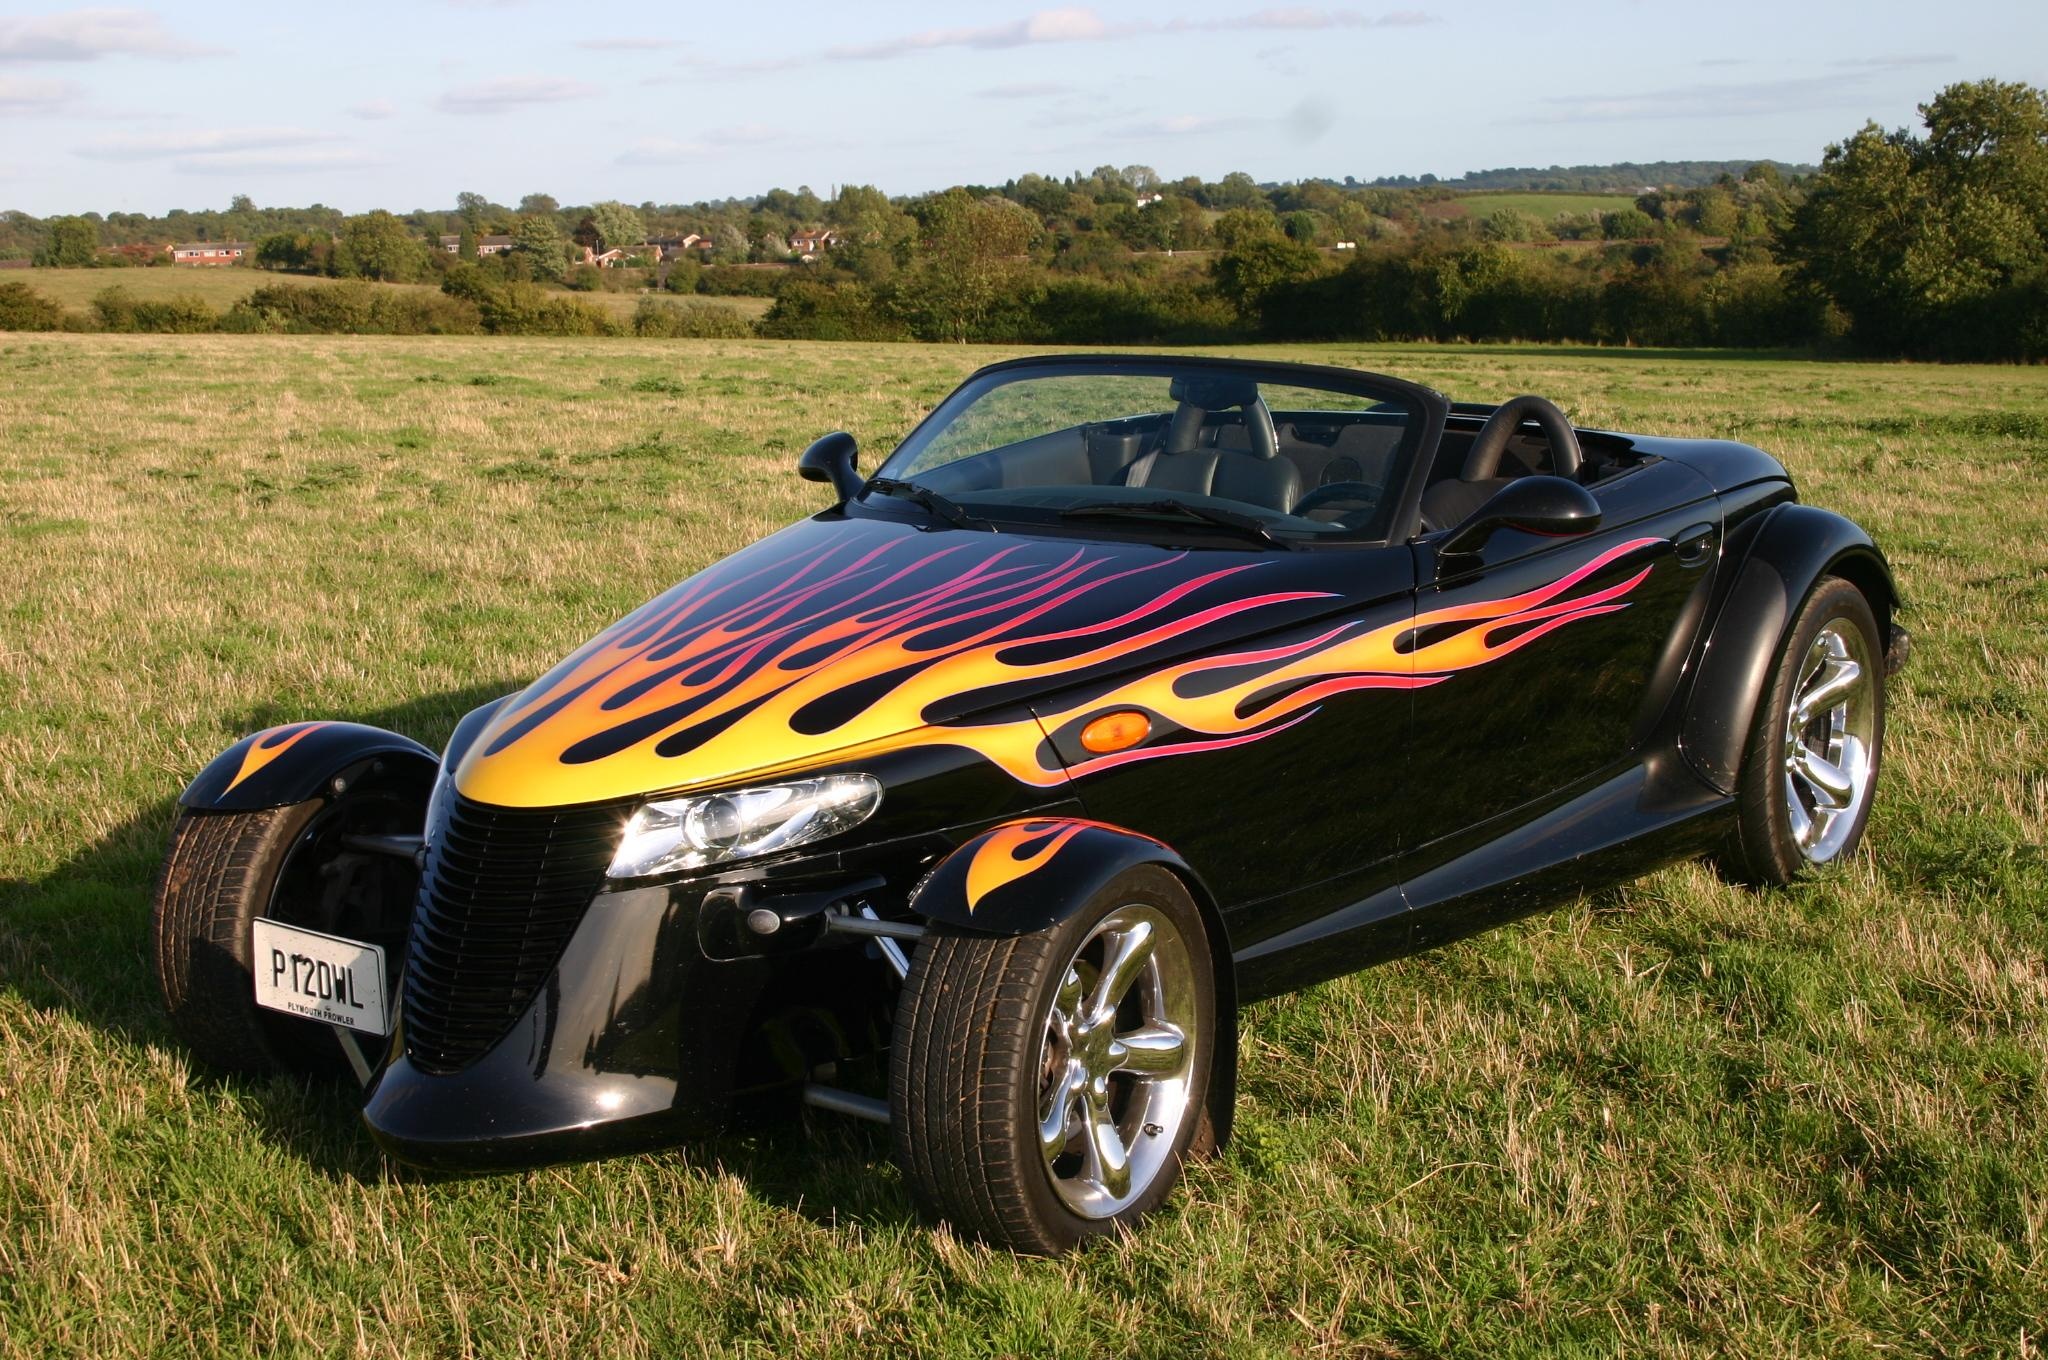 Plymouth Prowler, Exquisite HD wallpapers, Next-level aesthetics, Iconic style, 2050x1360 HD Desktop